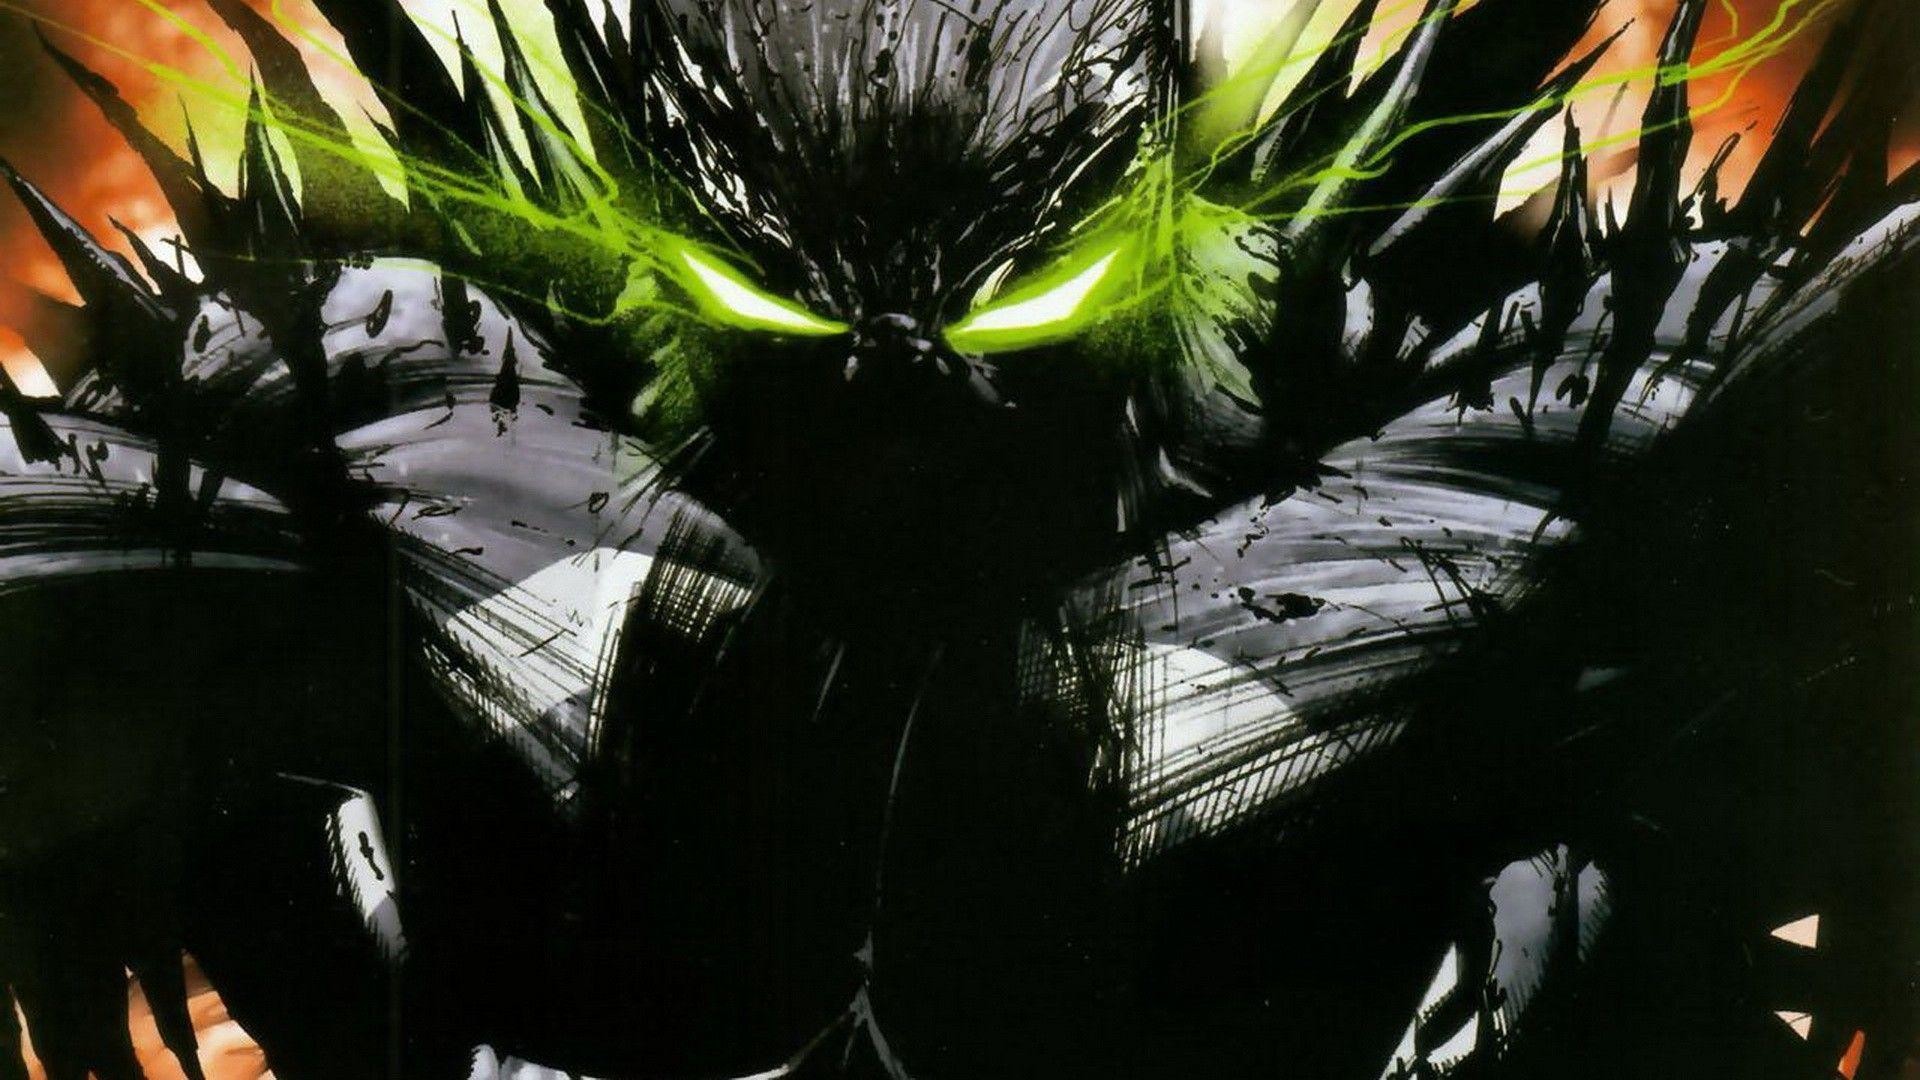 1920x1080 Spawn - Hd spawn wallpaper - Spawn wallpaper hd - Spawn pictures .